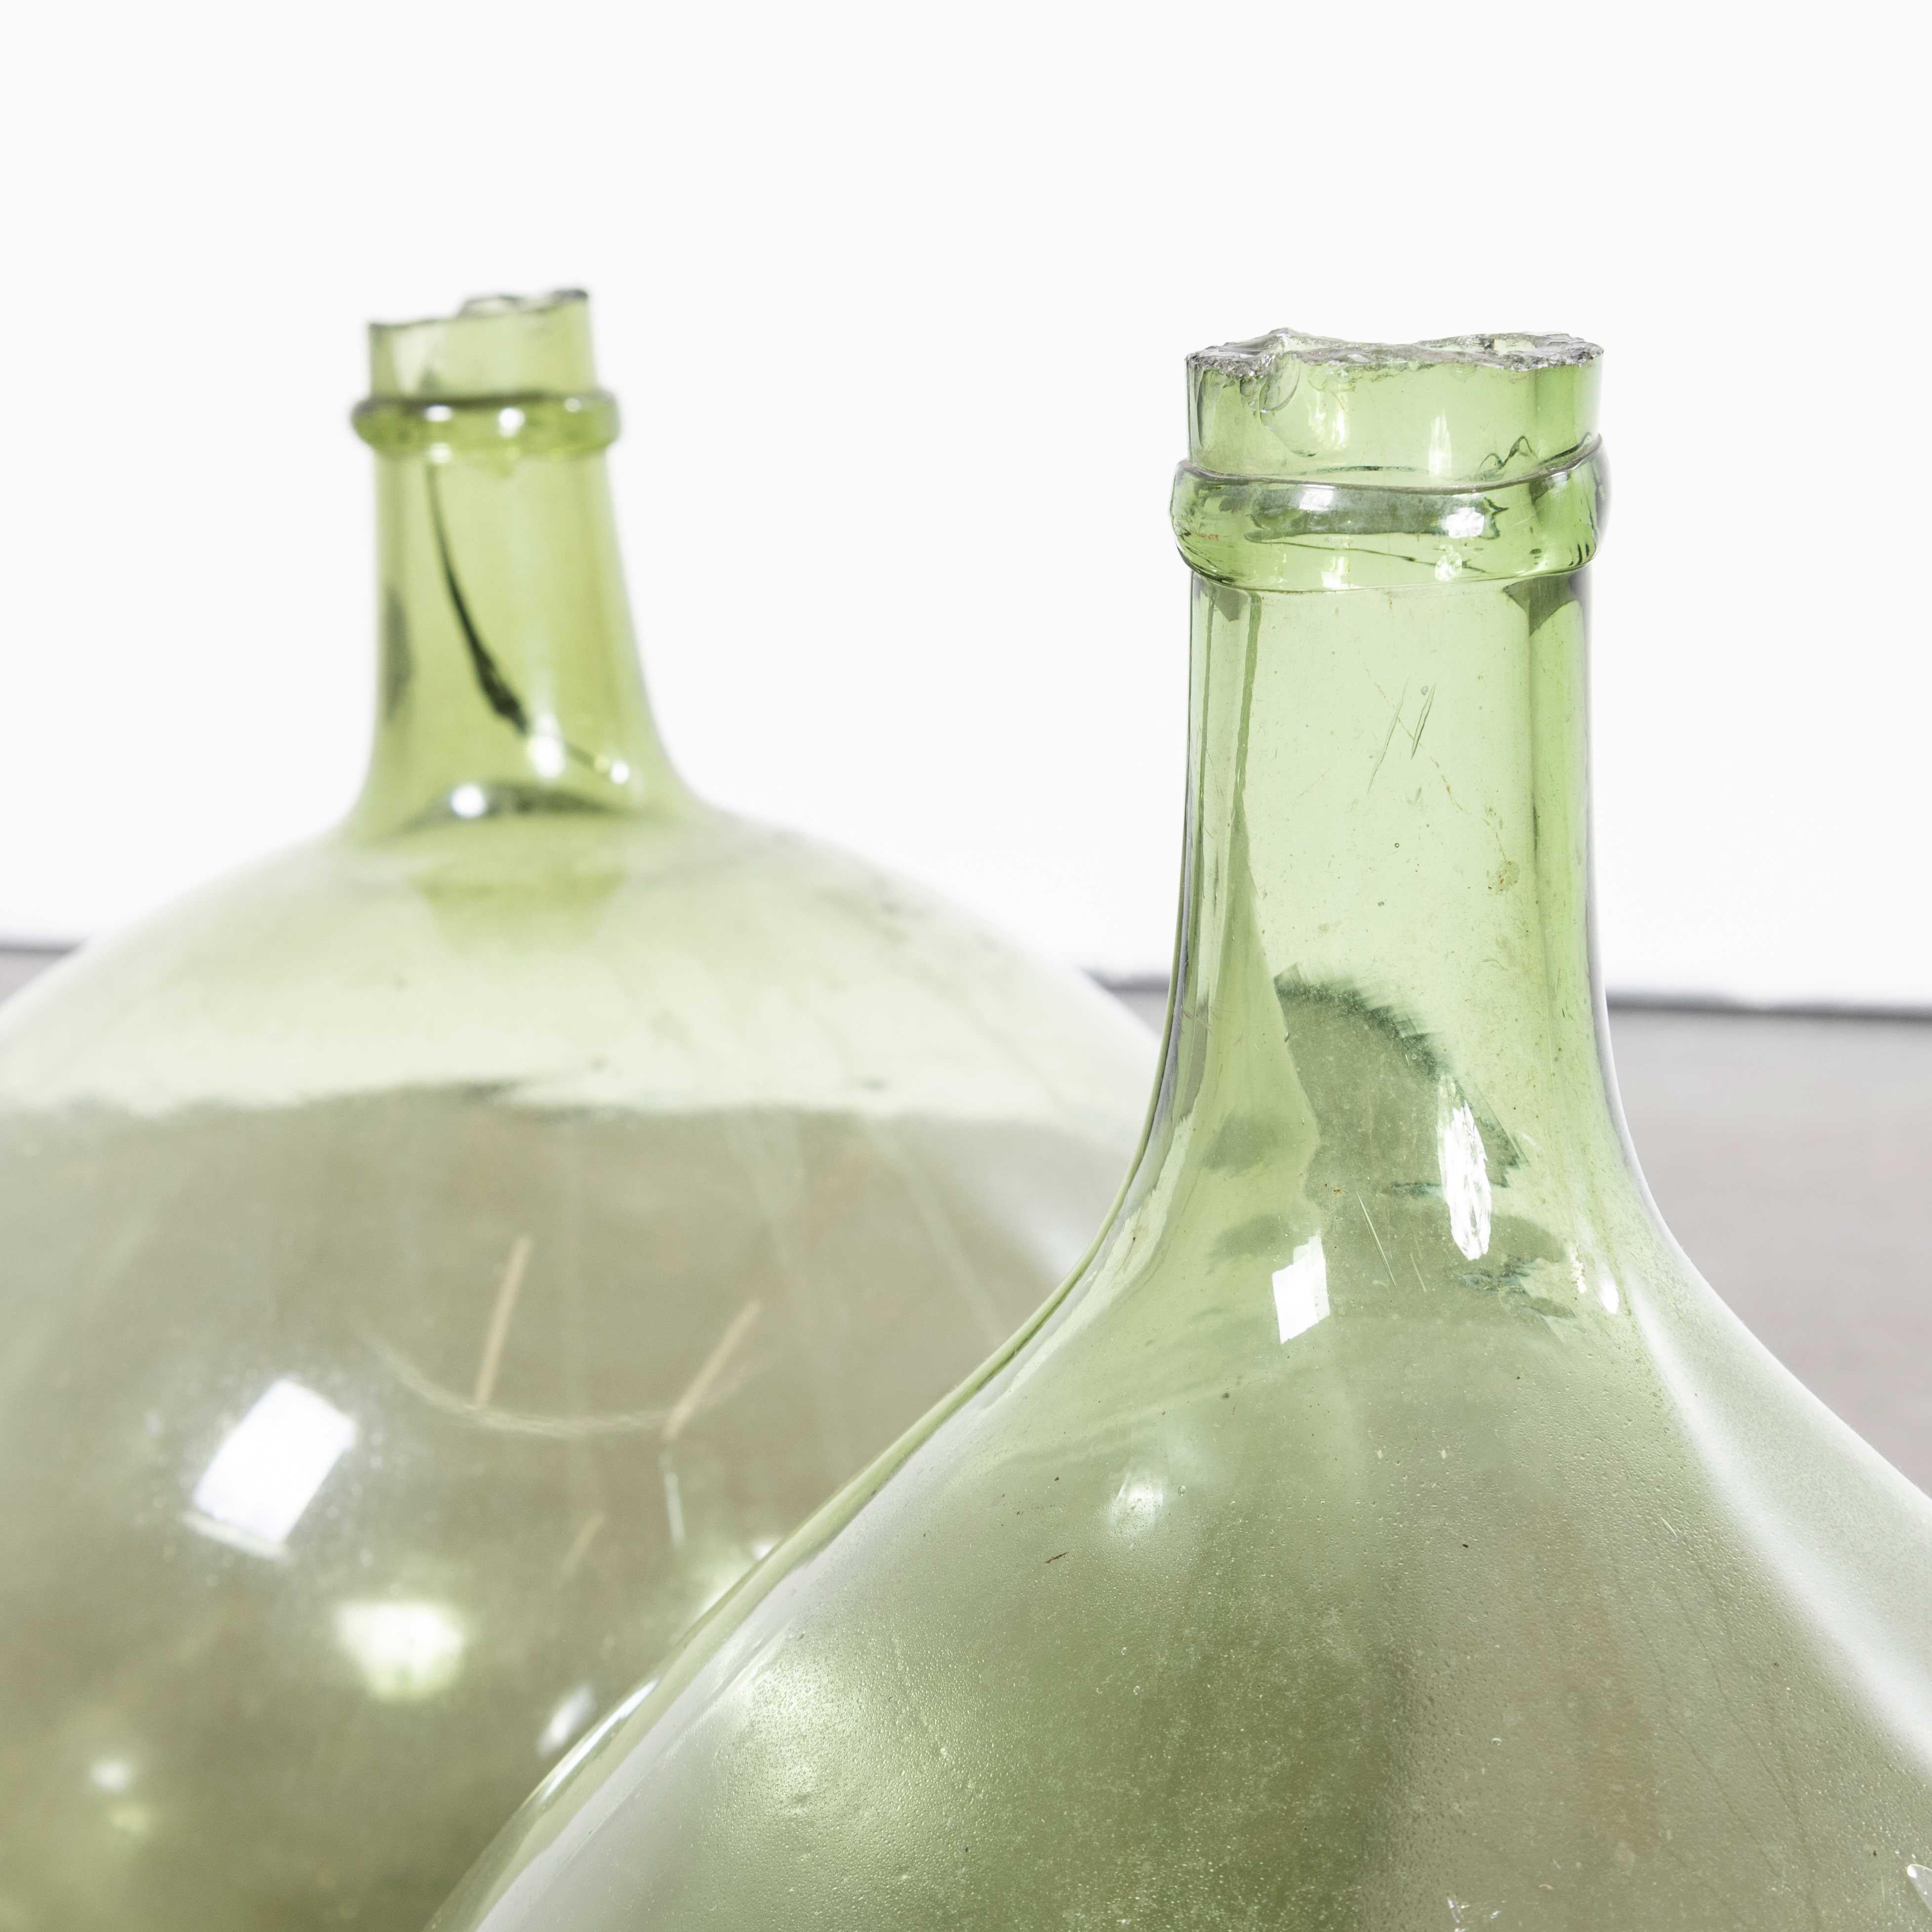 Vintage French Glass Demijohns – Pair (957.21)
Vintage French Glass Demijohns – Pair. A pair of mouth blown glass demijohns used as a traditional containers mainly for wine storage and transport. These demijohns have been carefully cleaned.